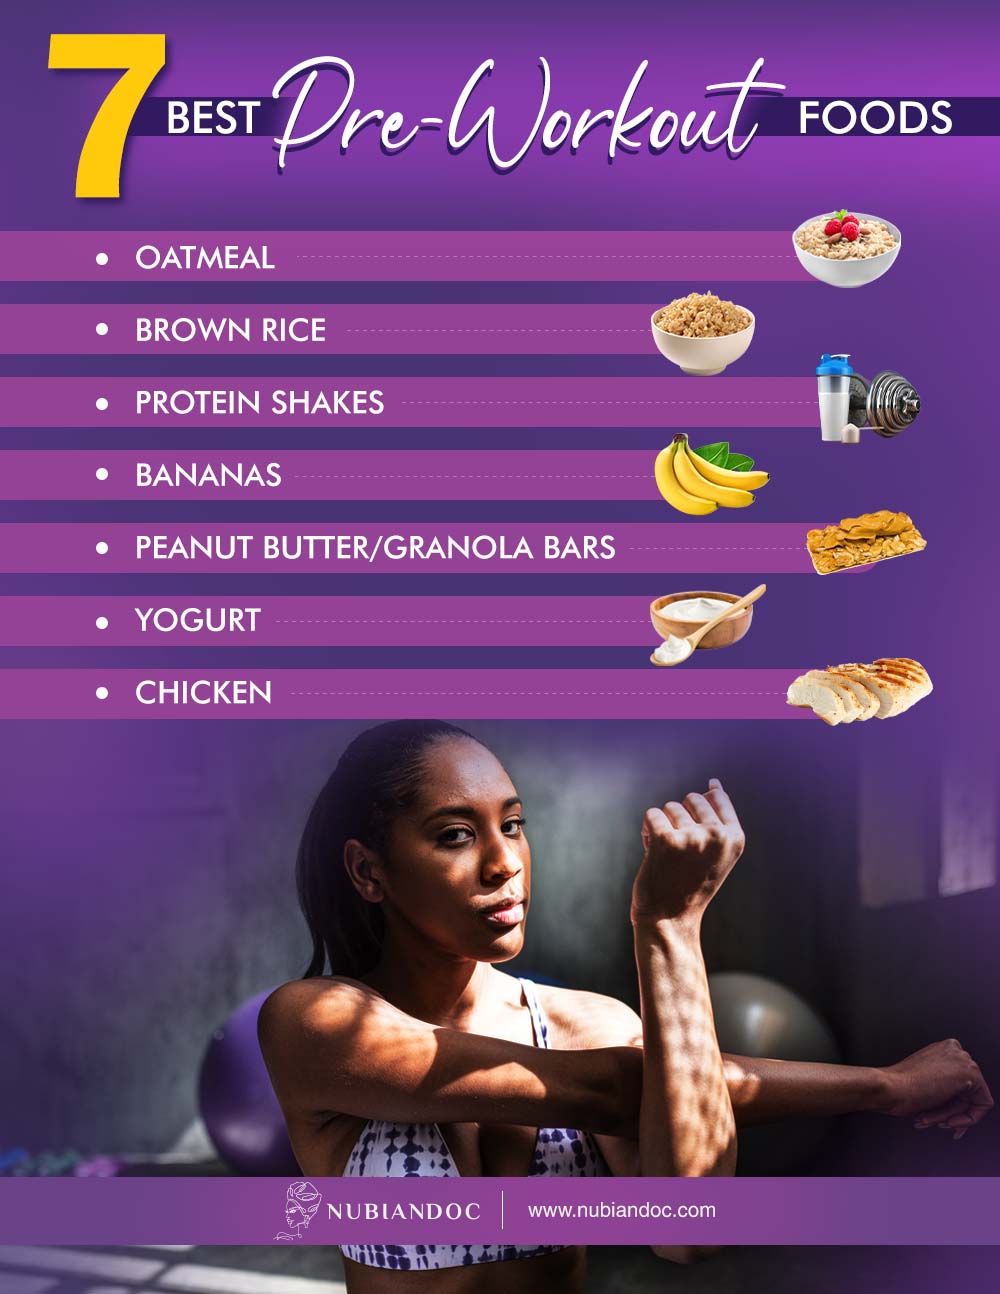 7 best pre-workout foods